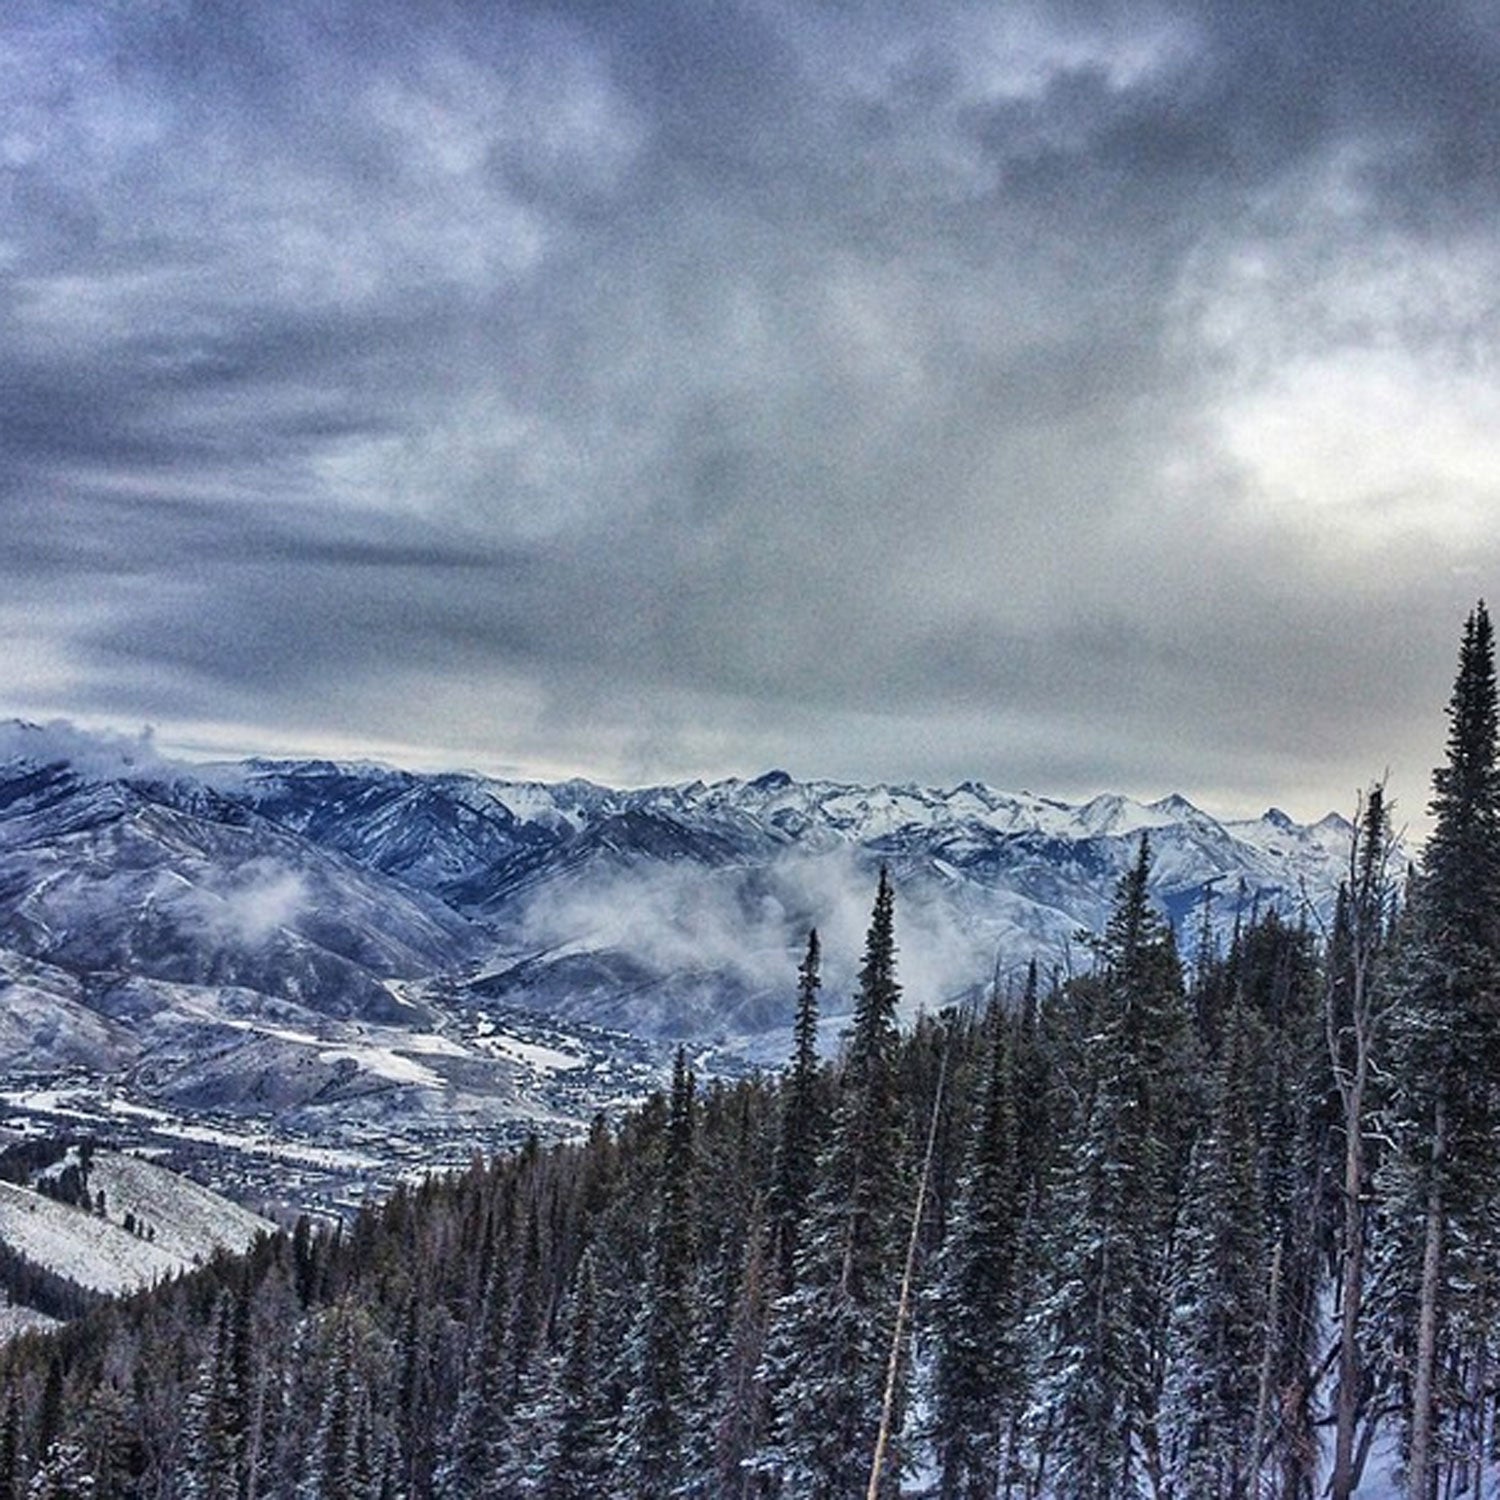 Know what we learned from Sun Valley’s Instagrams? Every other town that entered the wild-card round was just a little less pretty. Besides that? There’s enormous fish in Mackay Reservoir, mountain biking and skiing at Bald Mountain, and climbing on the remnants of ancient lava tubes.